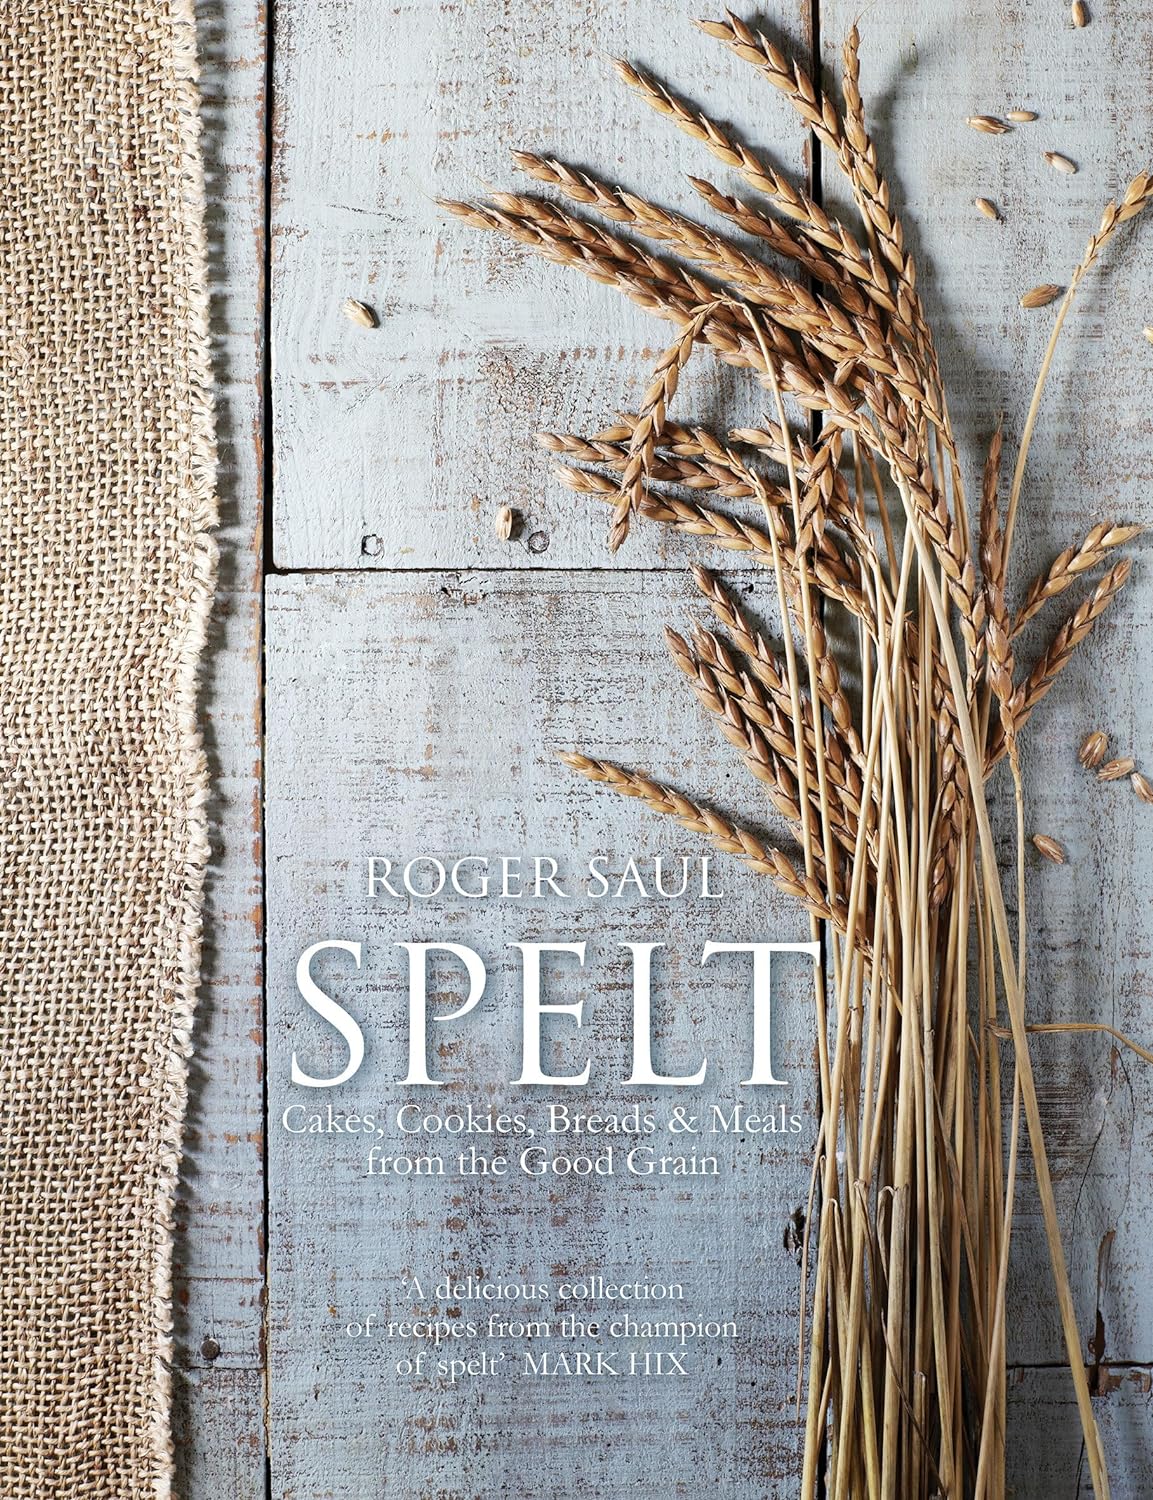 Spelt: Cakes, cookies, breads & meals from the good grain (Roger Saul))